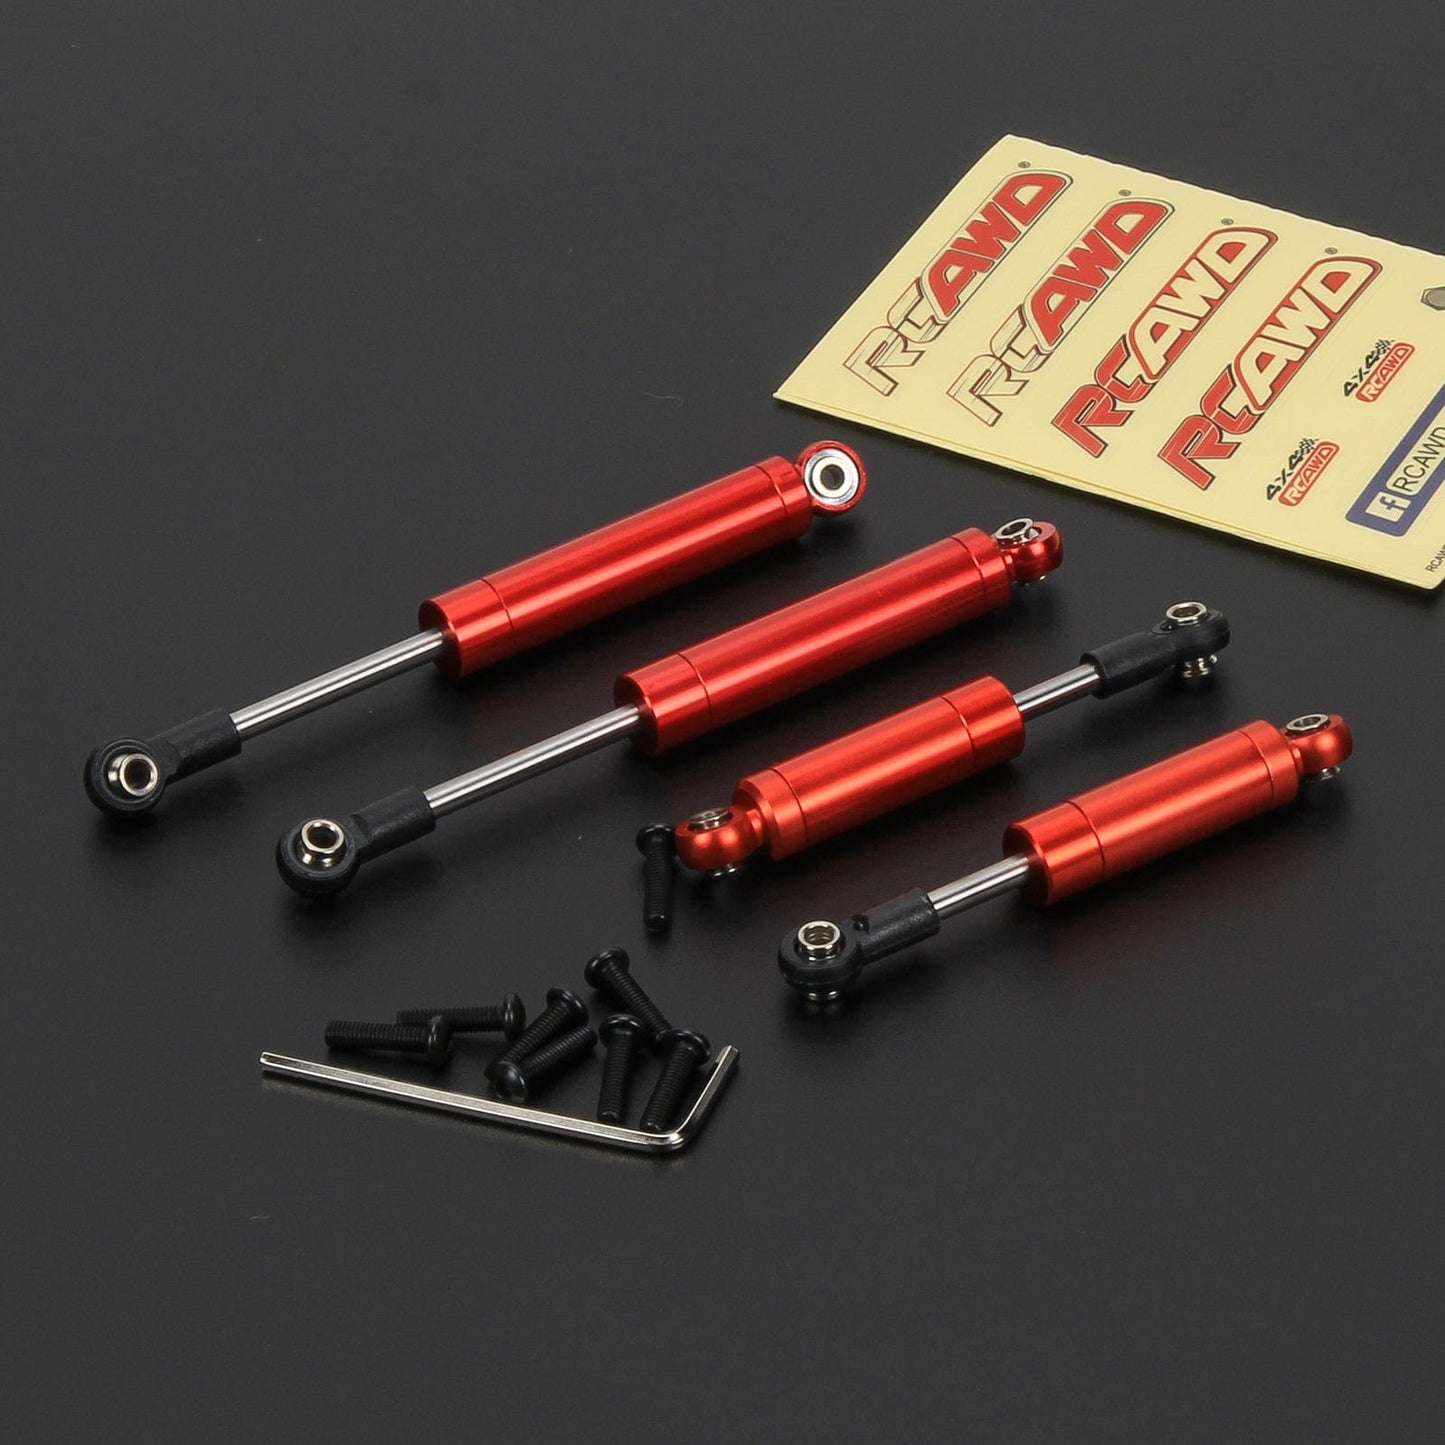 RCAWD Axial Yeti Jr Red RCAWD Axial Yeti Jr Upgrades Aluminum 72mm102mm Shocks Absorber oil-filled type